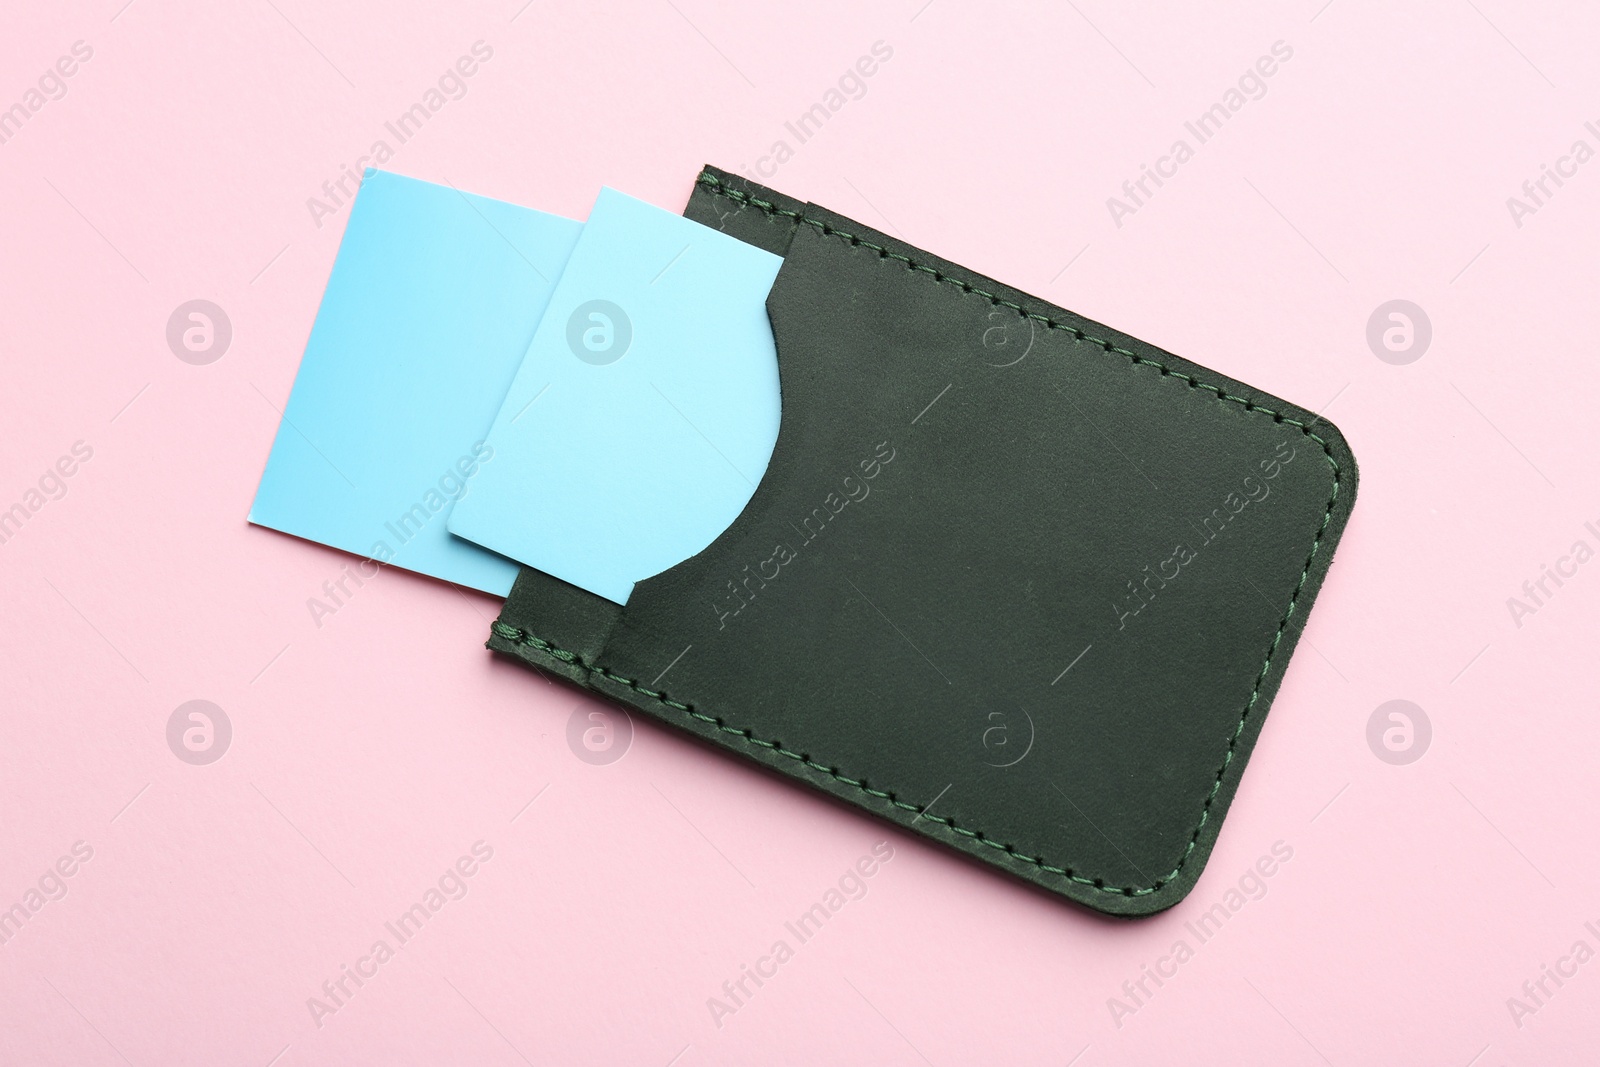 Photo of Leather business card holder with blank cards on pink background, top view